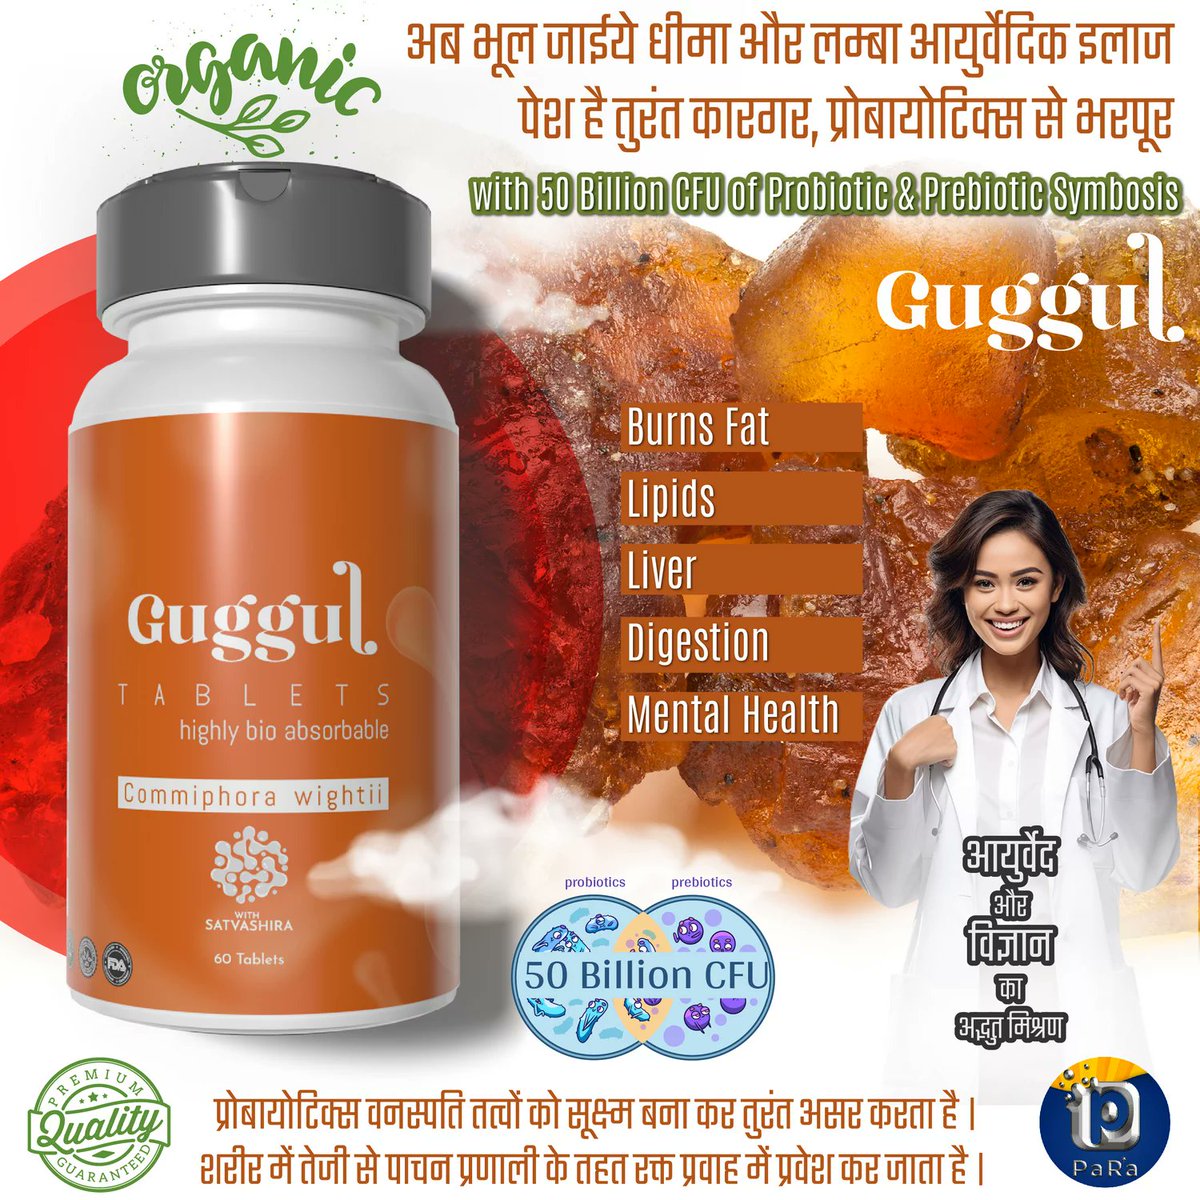 ORGANIC BIO GUGGUL AND PROBIOTIC (60 TABLETS) BY PHYTO ATOMY 
MORE INFORMATION CALL 7385071643

#phytoatomy #healthcare #guggul